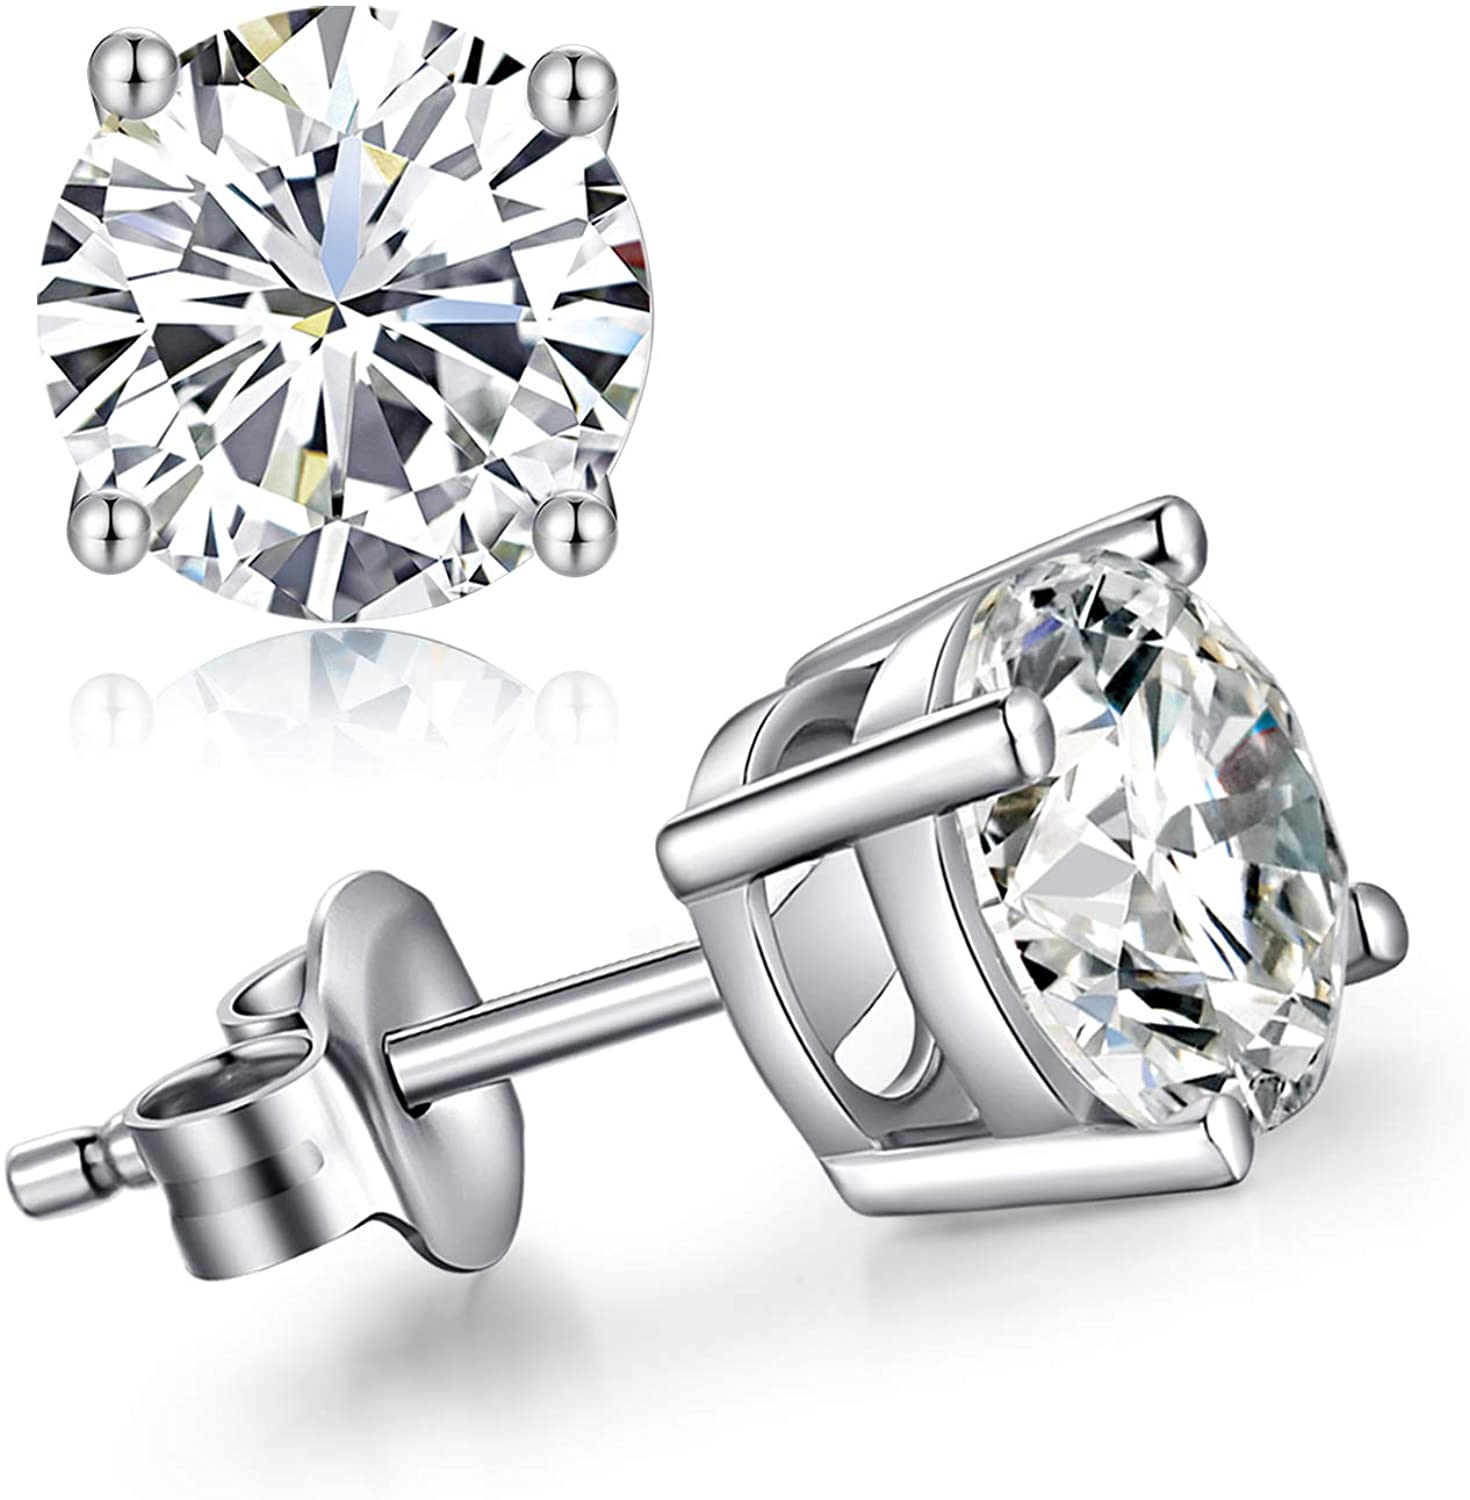 Bonjour Jewelers 14k White Gold Over Silver 8mm Round Cut Created White Diamond Stud Earrings